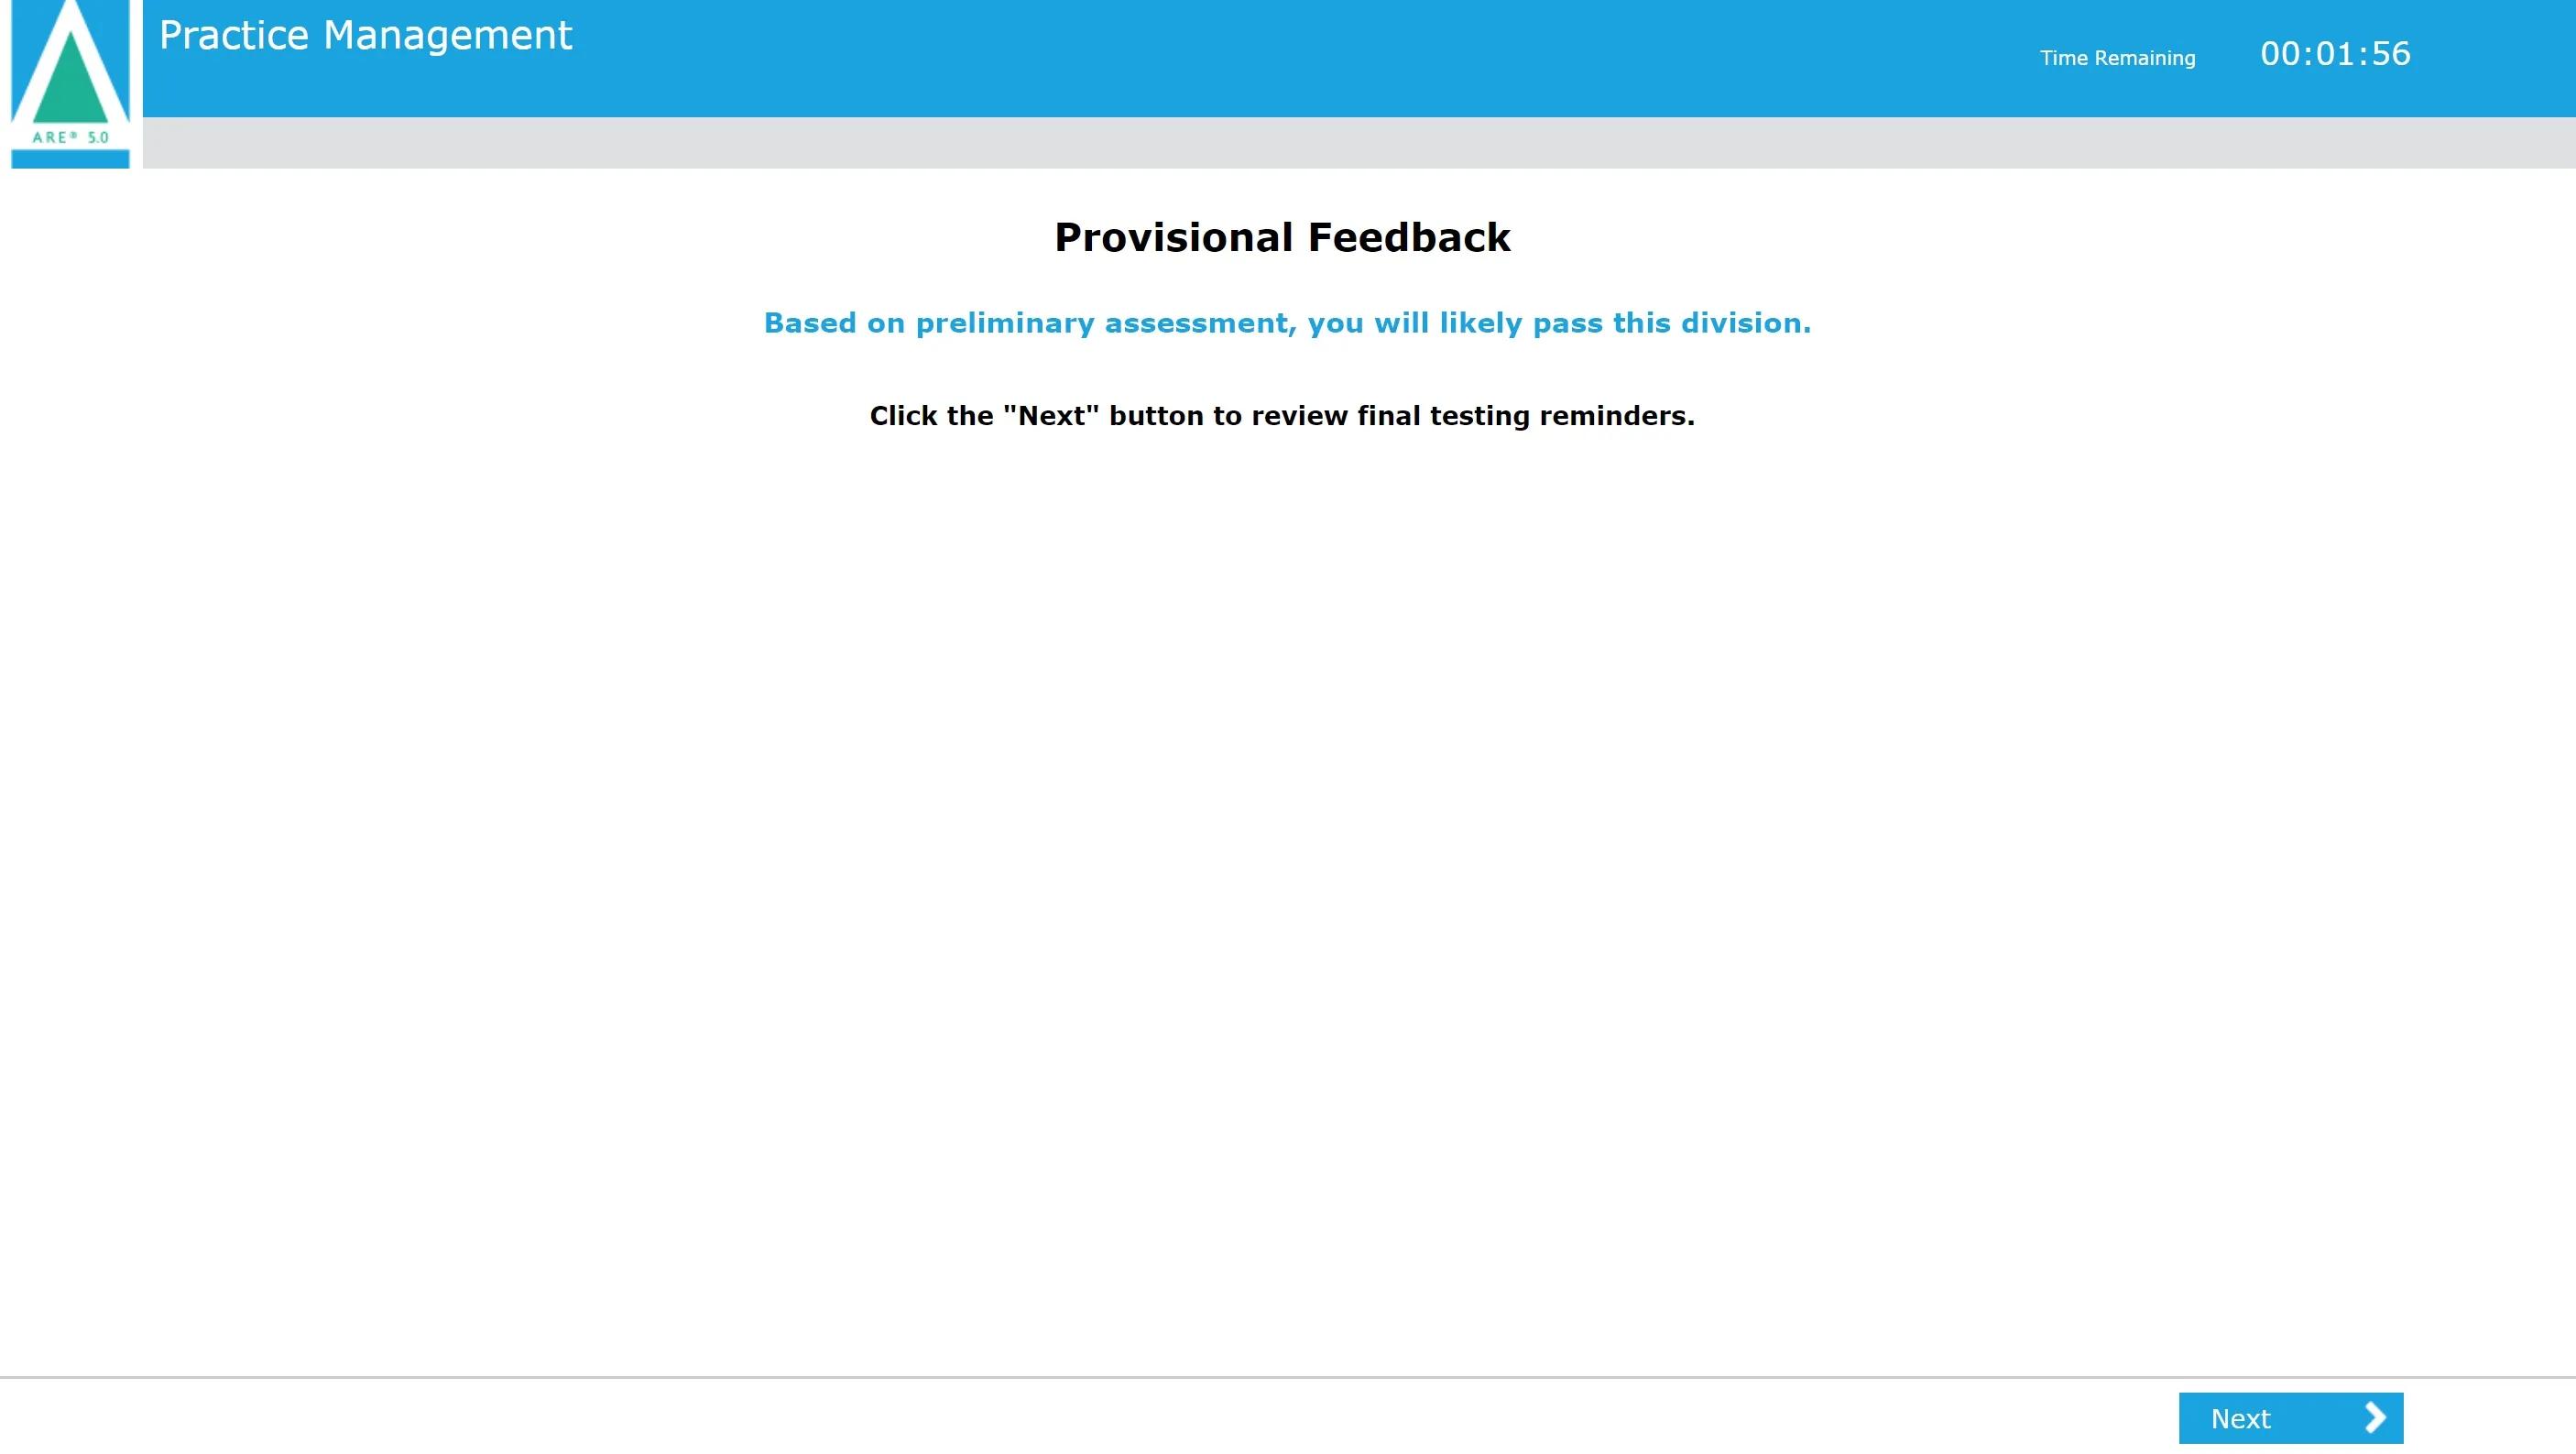 Provisional feedback will provide a preliminary assessment of your results. 